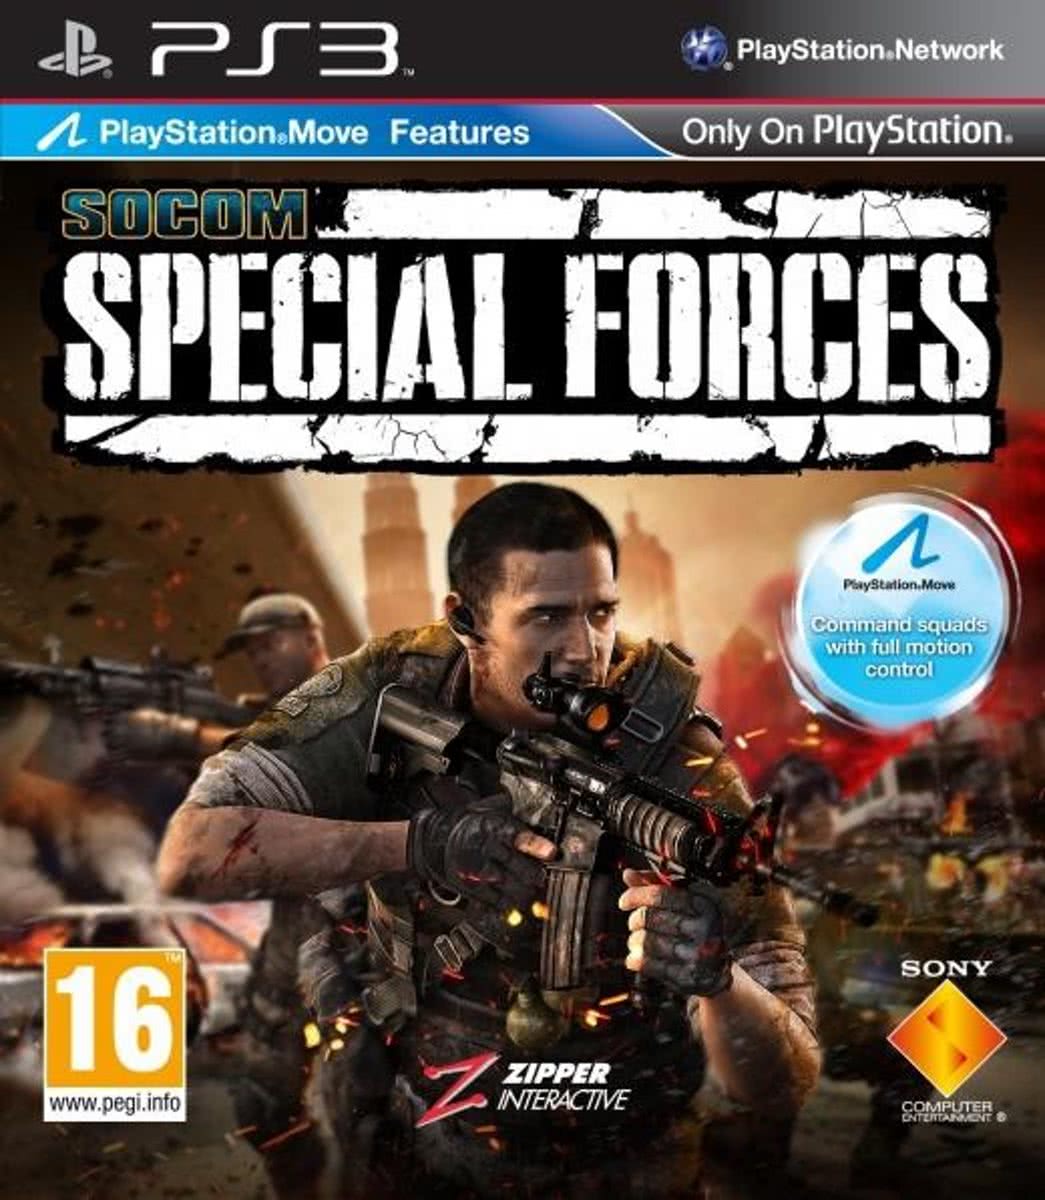 SOCOM: Special Forces - PlayStation Move